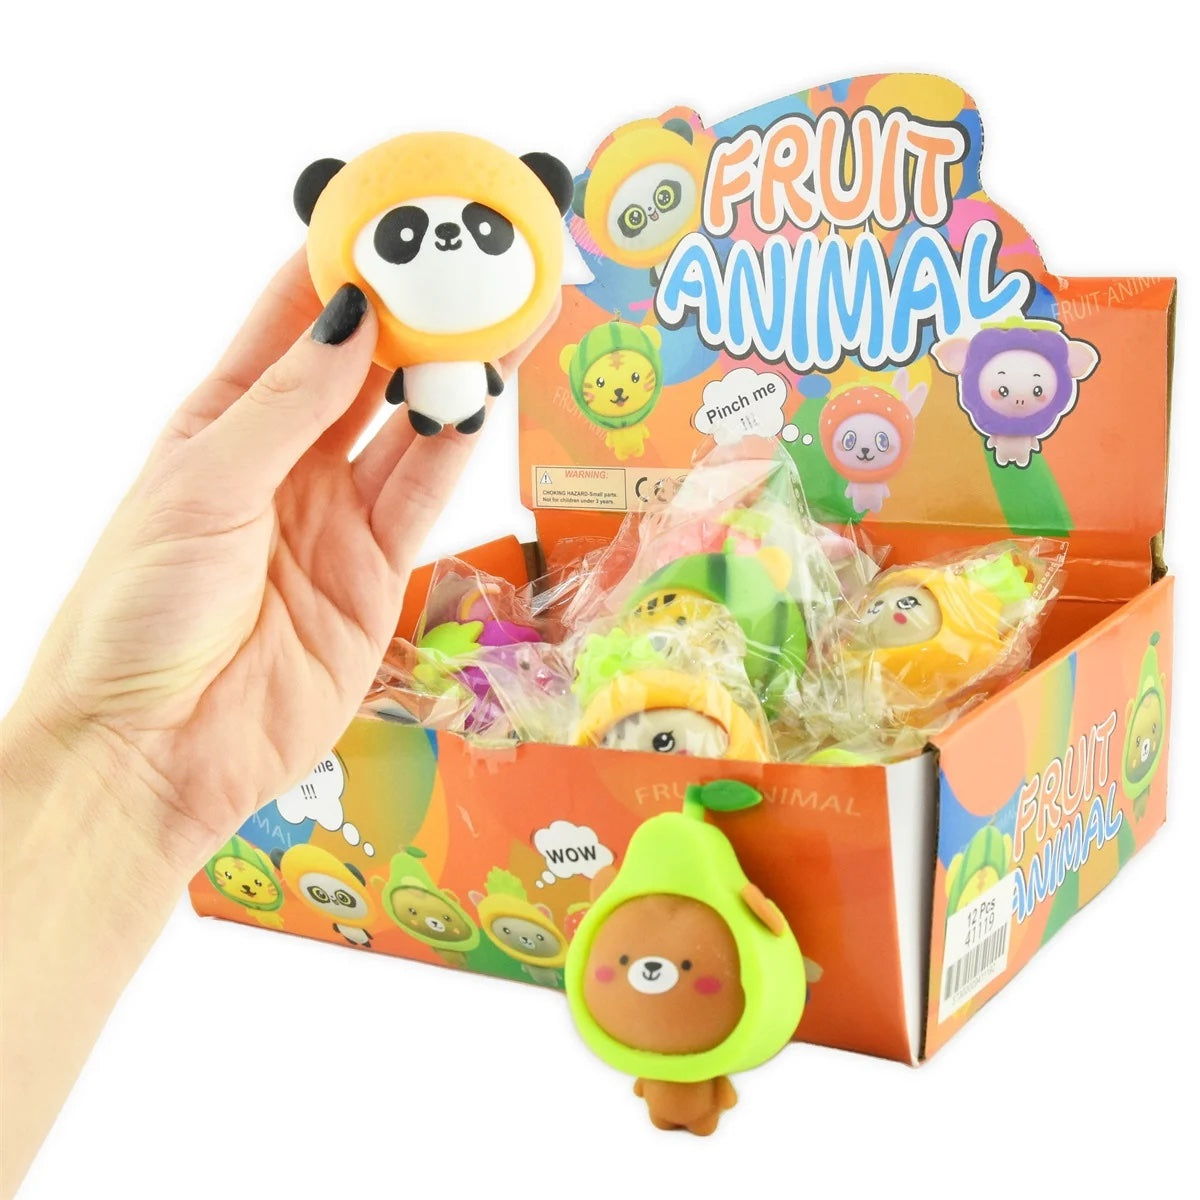 Squeeze animal with fruit costume